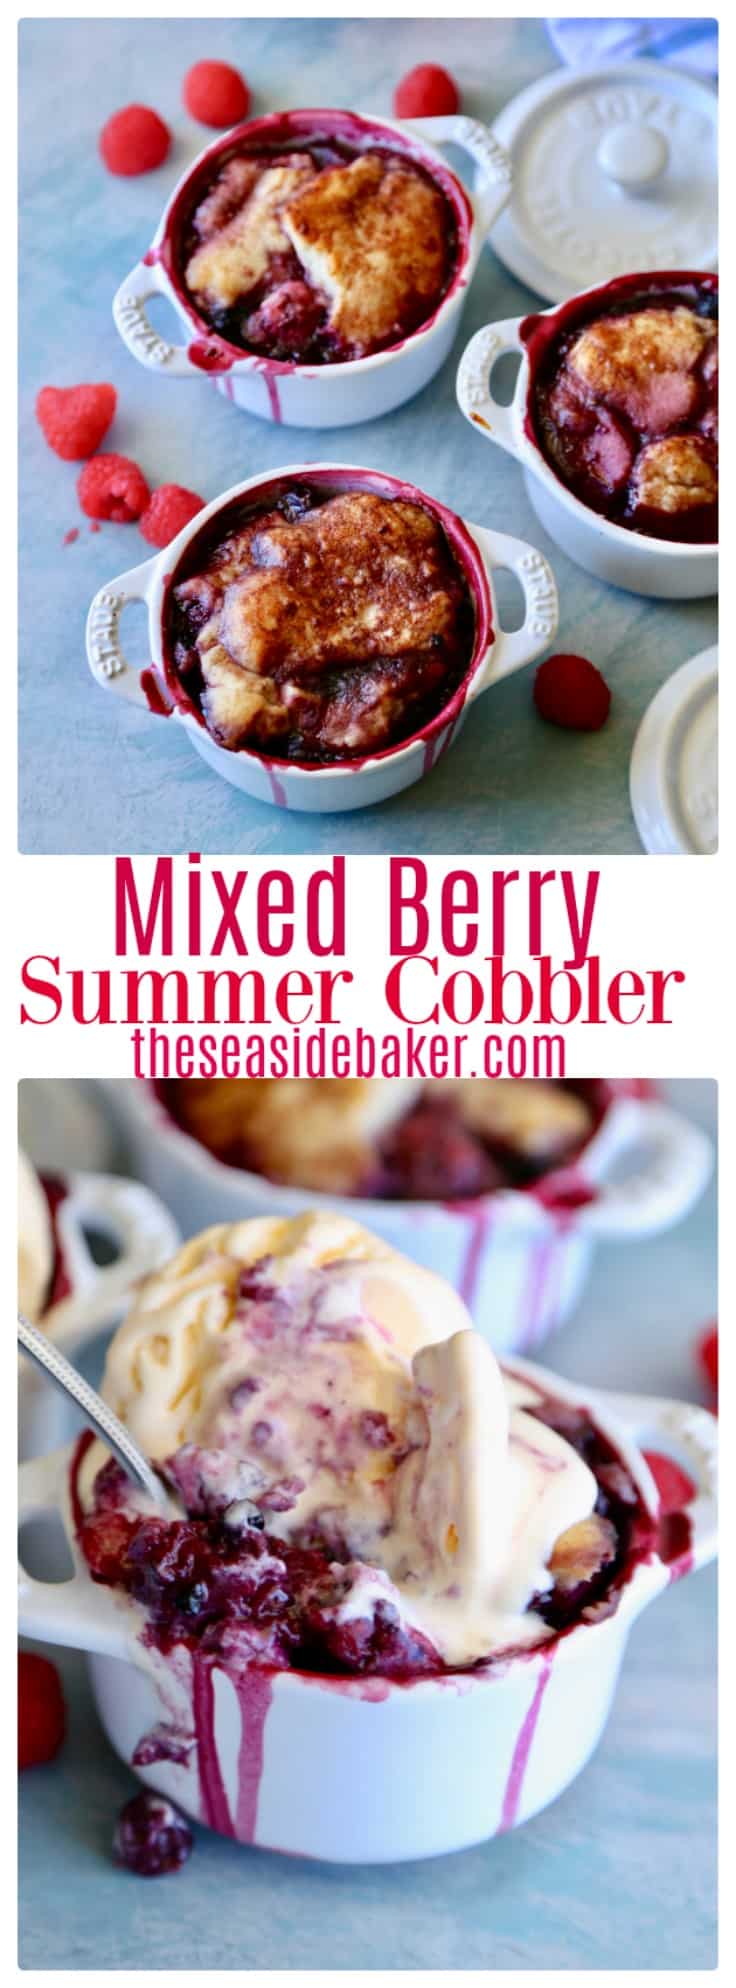 Blueberry, blackberry, and raspberry summer cobbler topped with buttery delicious cakey topping sprinkled with cinnamon and sugar